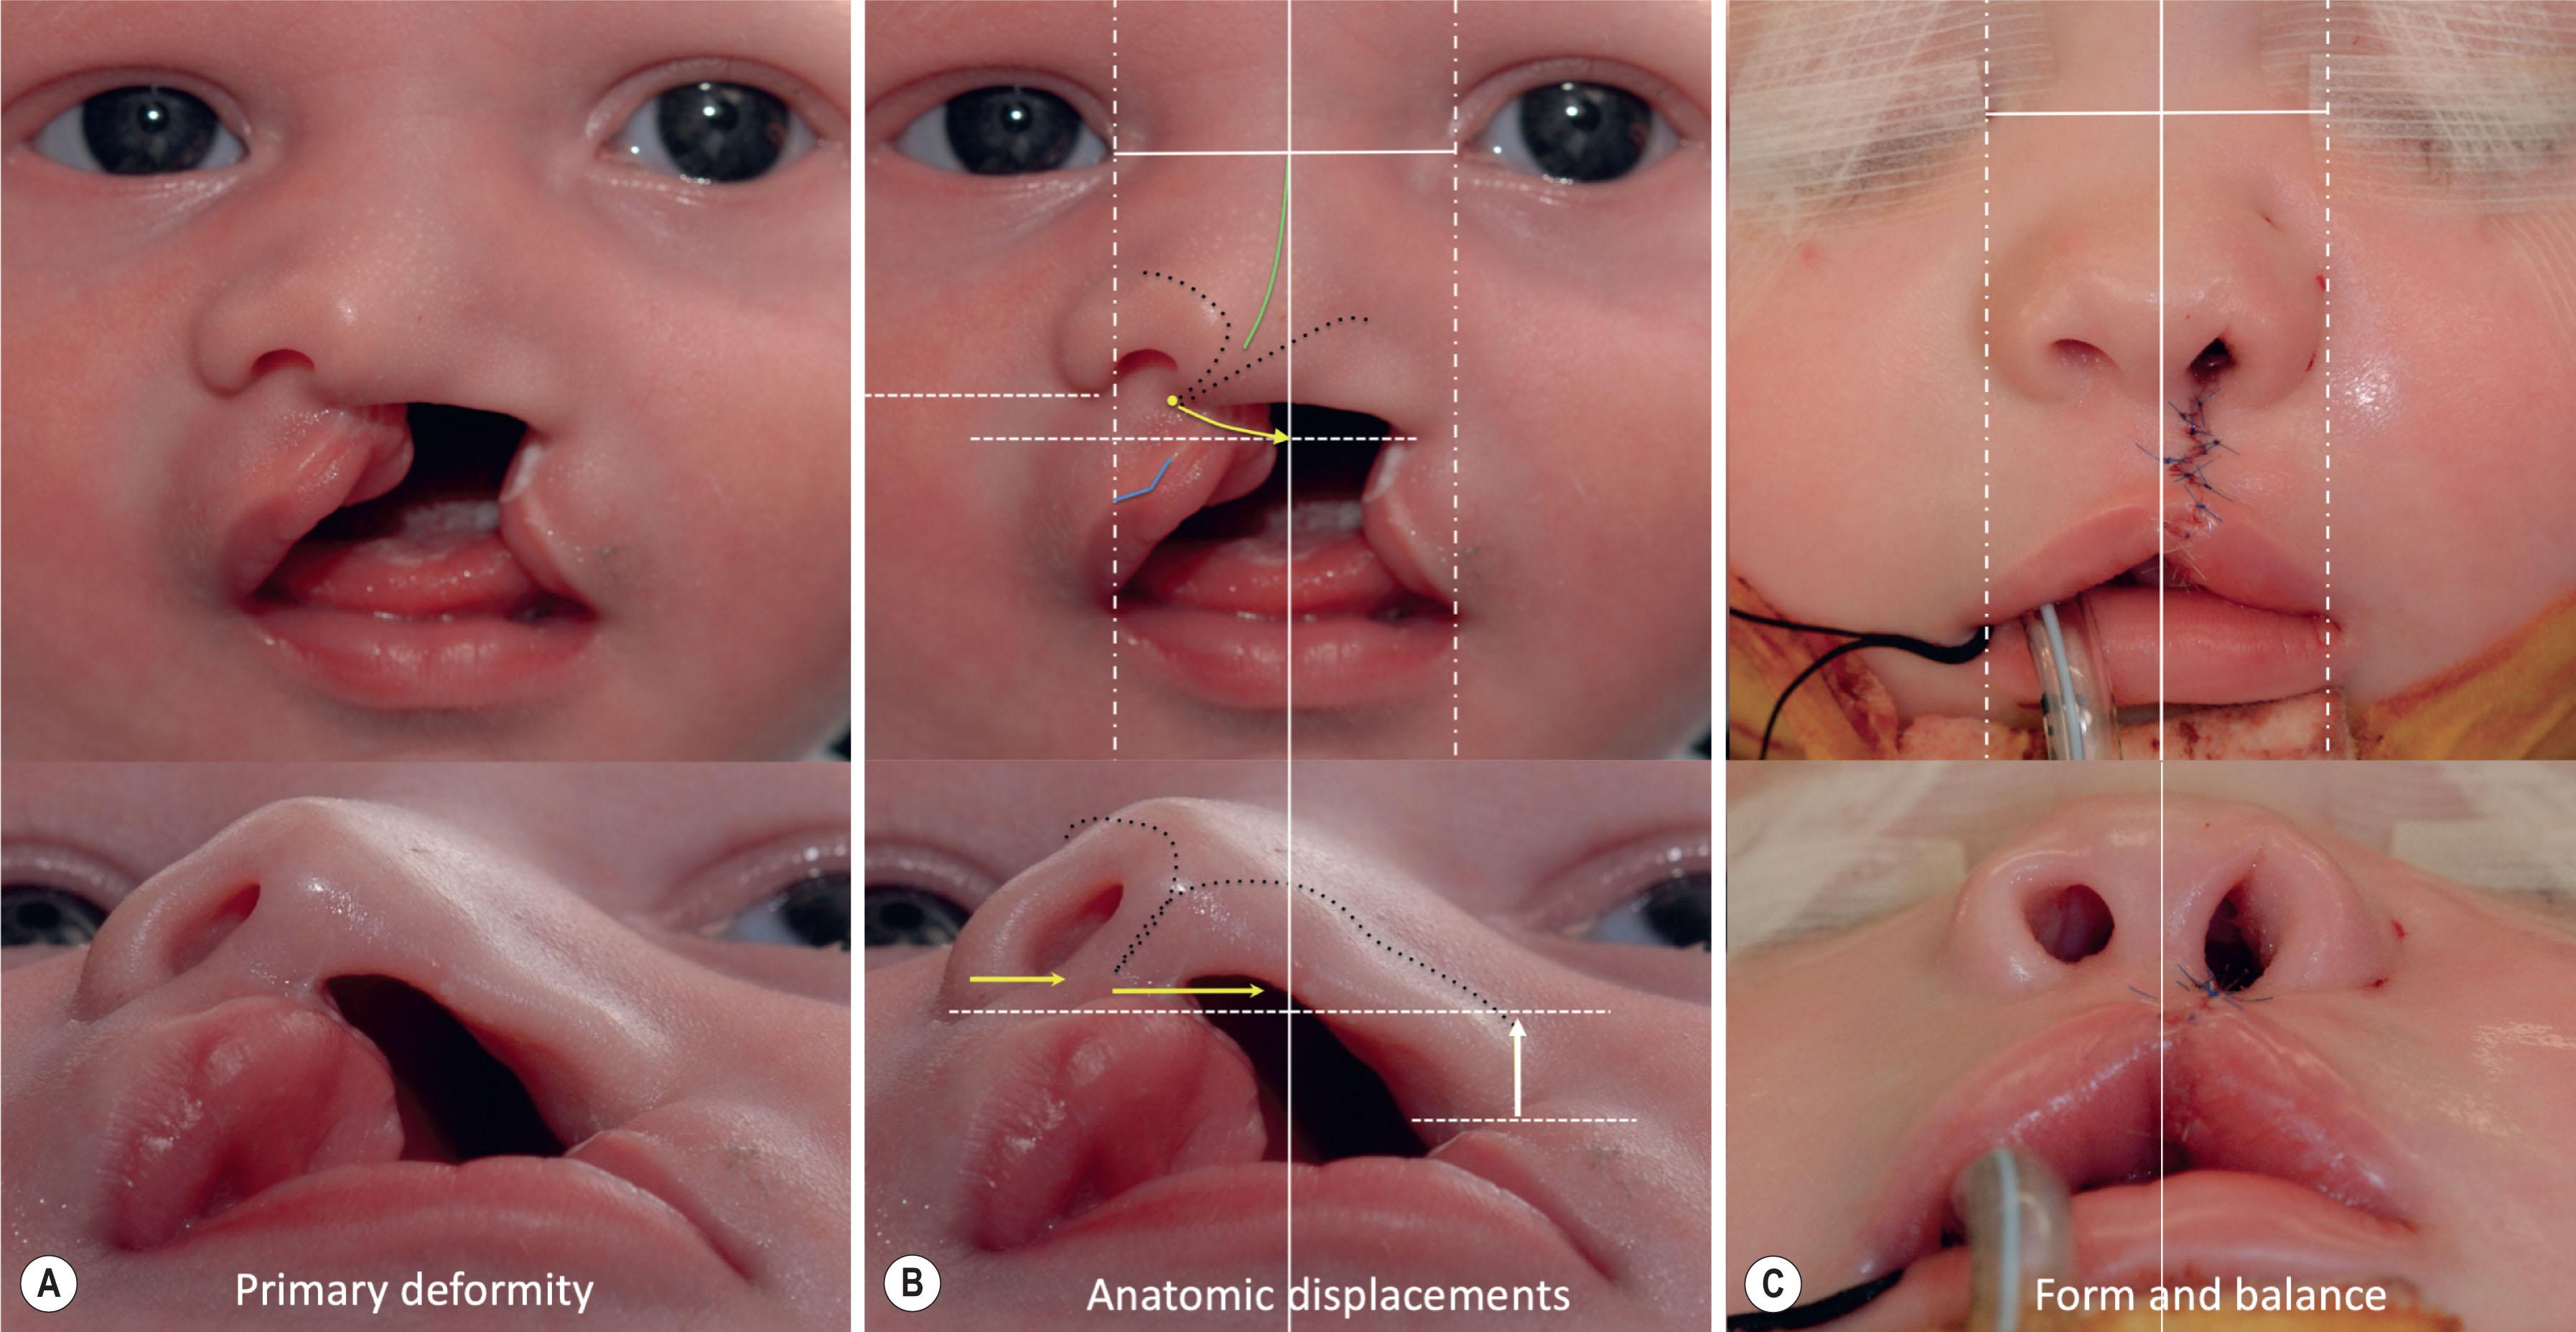 Figure 19.4.3, Optical illusions and surgical goals: (A) The primary deformity appears as if the cleft alar base is displaced laterally, resulting in collapse of the alar dome. Correction would seem to involve medial advancement of the cleft alar base. (B) With reference lines to guide our perceptions, it is actually the outward, upward, and forward deviation of columella and non-cleft alar base, combined with the retroposition of cleft alar base, that result in a twisting collapse of the nose. (C) Correction involves downward rotation of the columella and non-cleft alar base and anterior advancement of the cleft alar base (with no alteration in medial-lateral position).